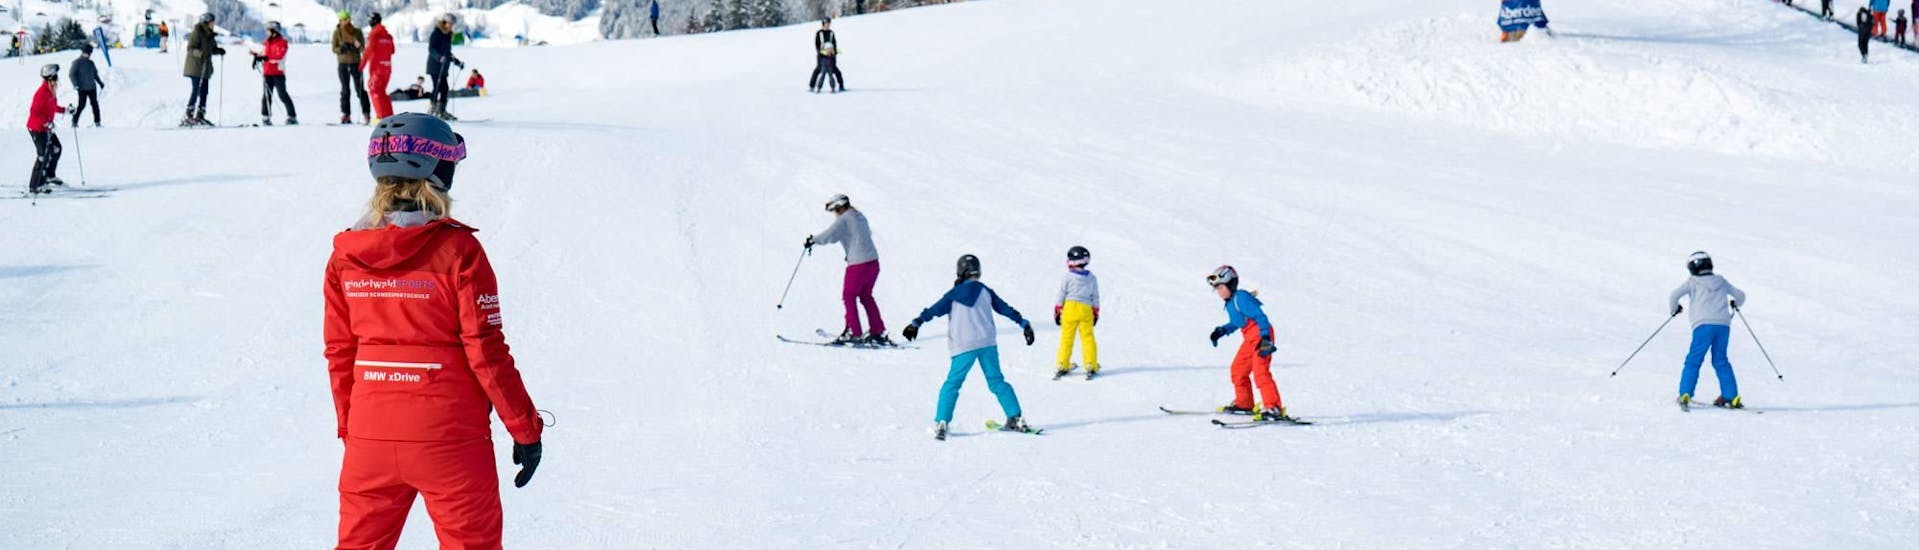 A family has fun at the "Family Fun Day" ski course with sledging with the Swiss Ski School Grindelwald.